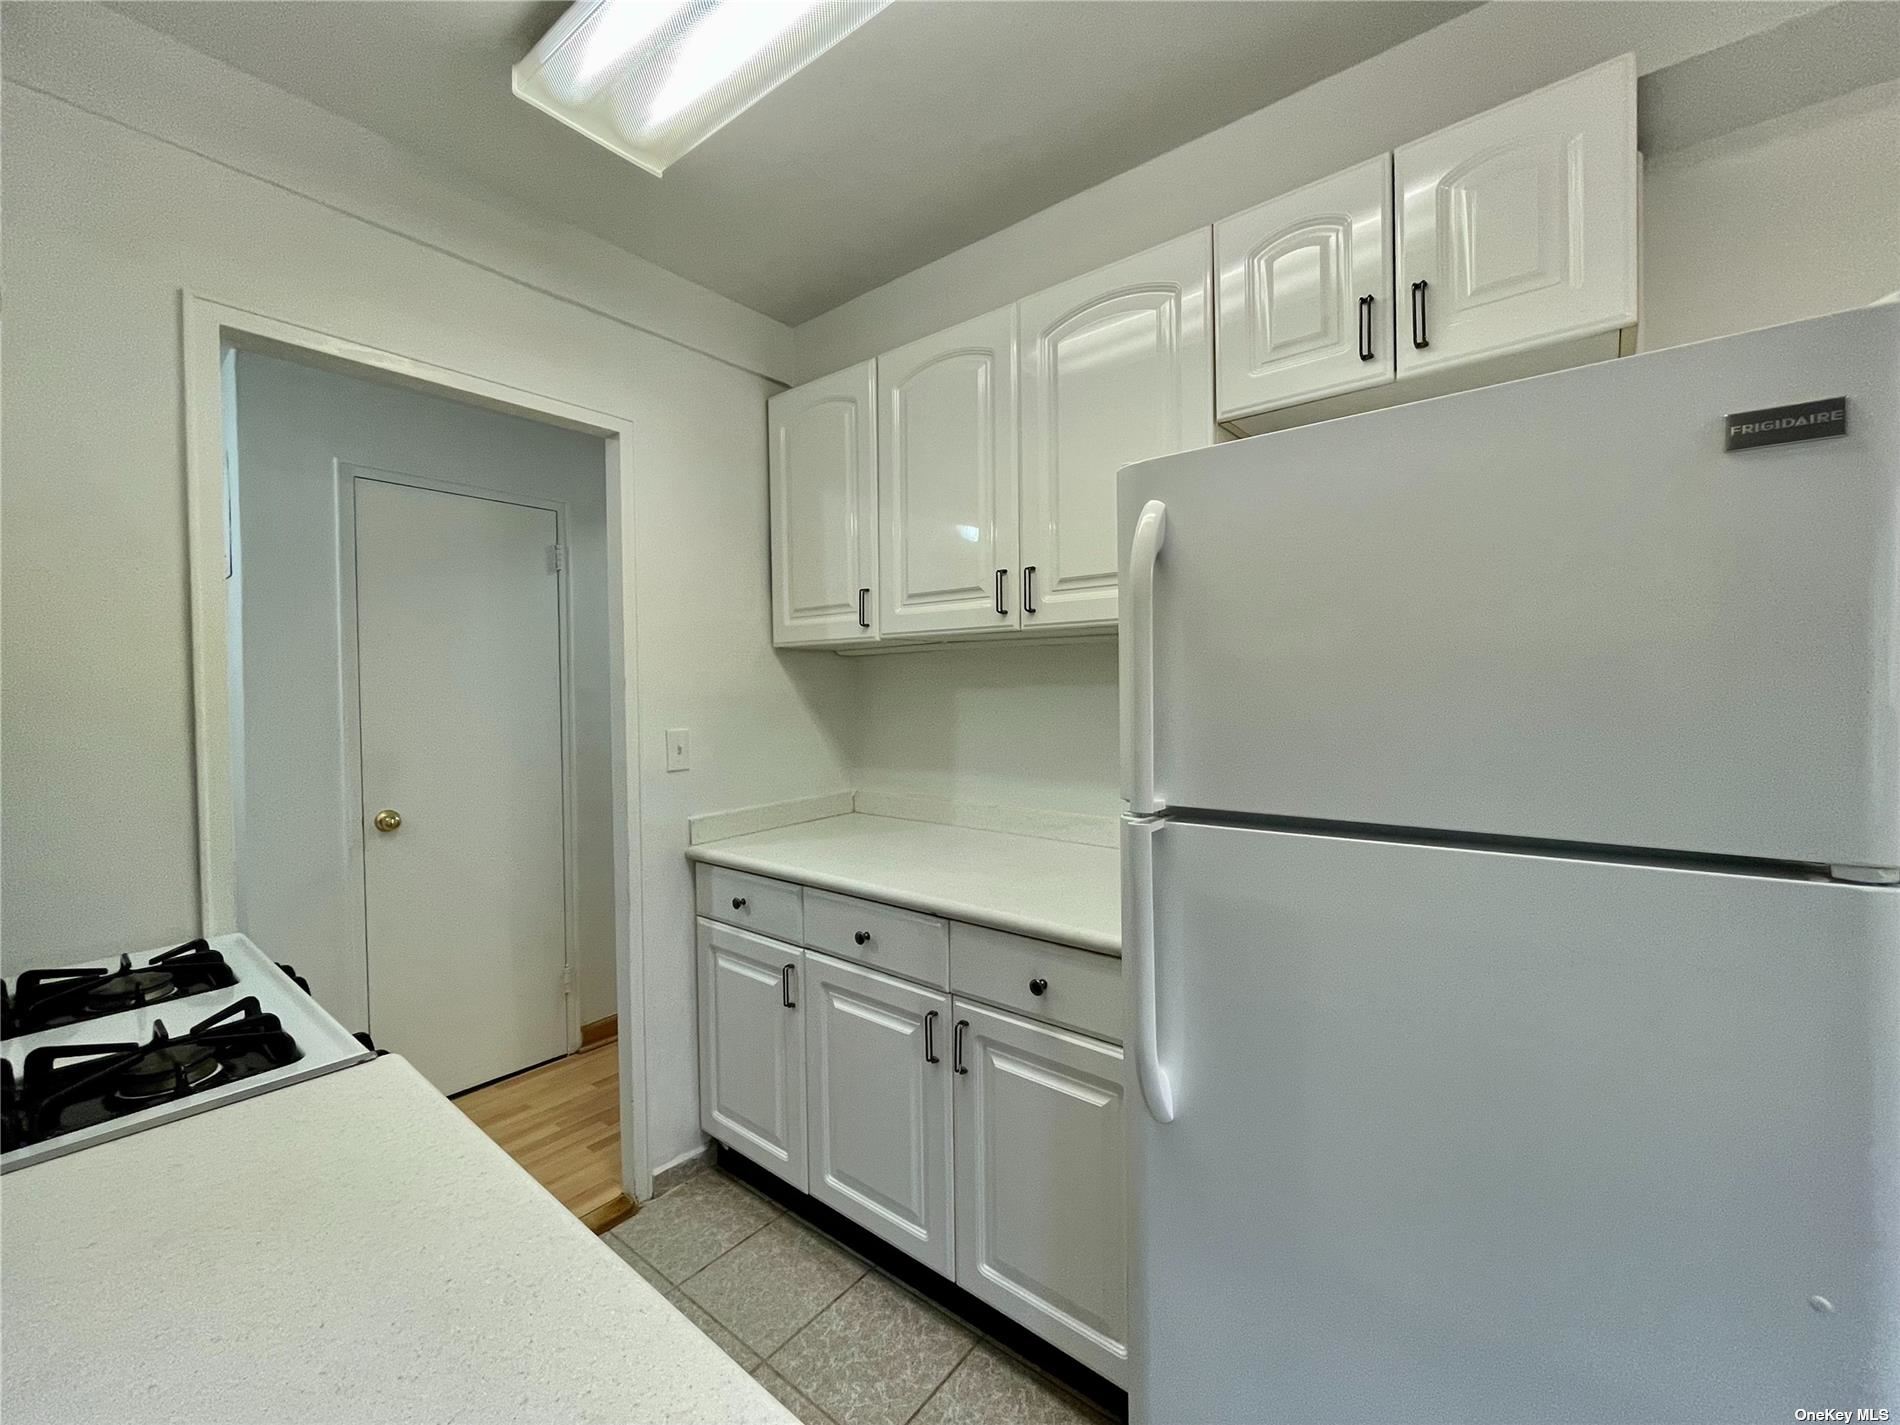 a kitchen with cabinets and a refrigerator